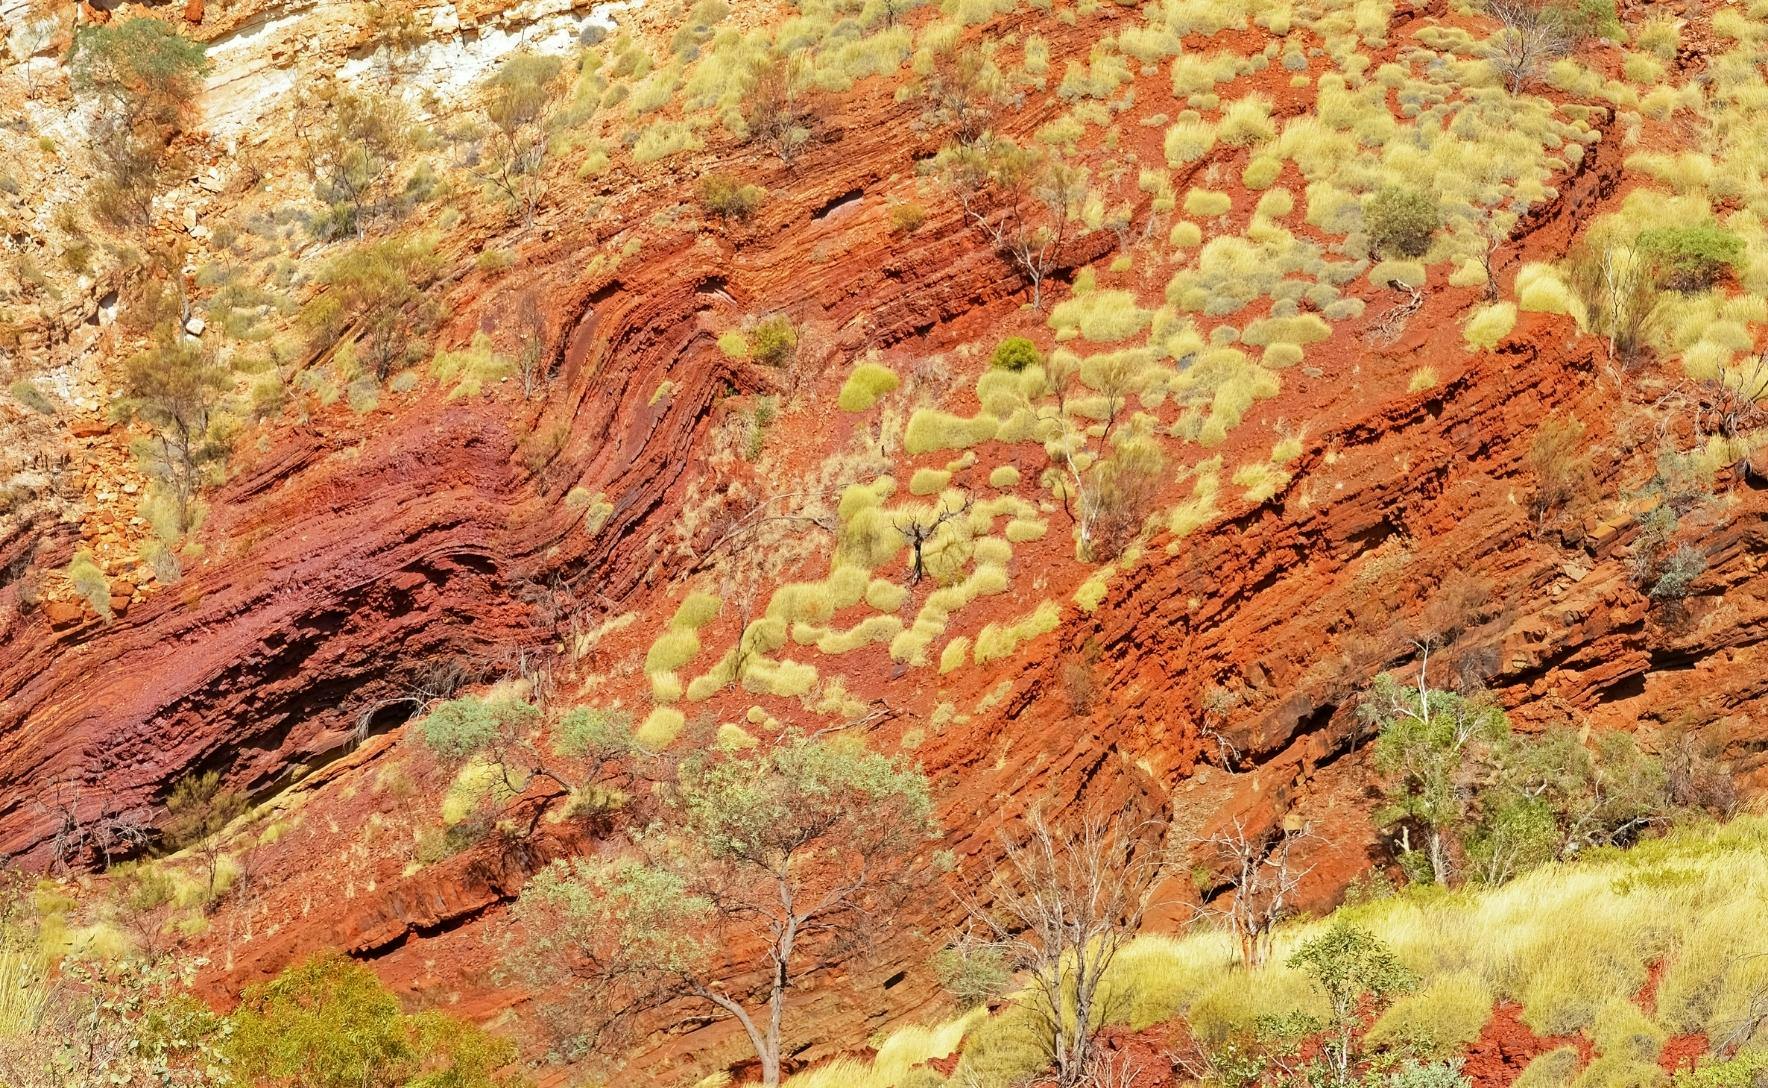 Red rock formations with sparse light green shrubs scattered across the red earth.